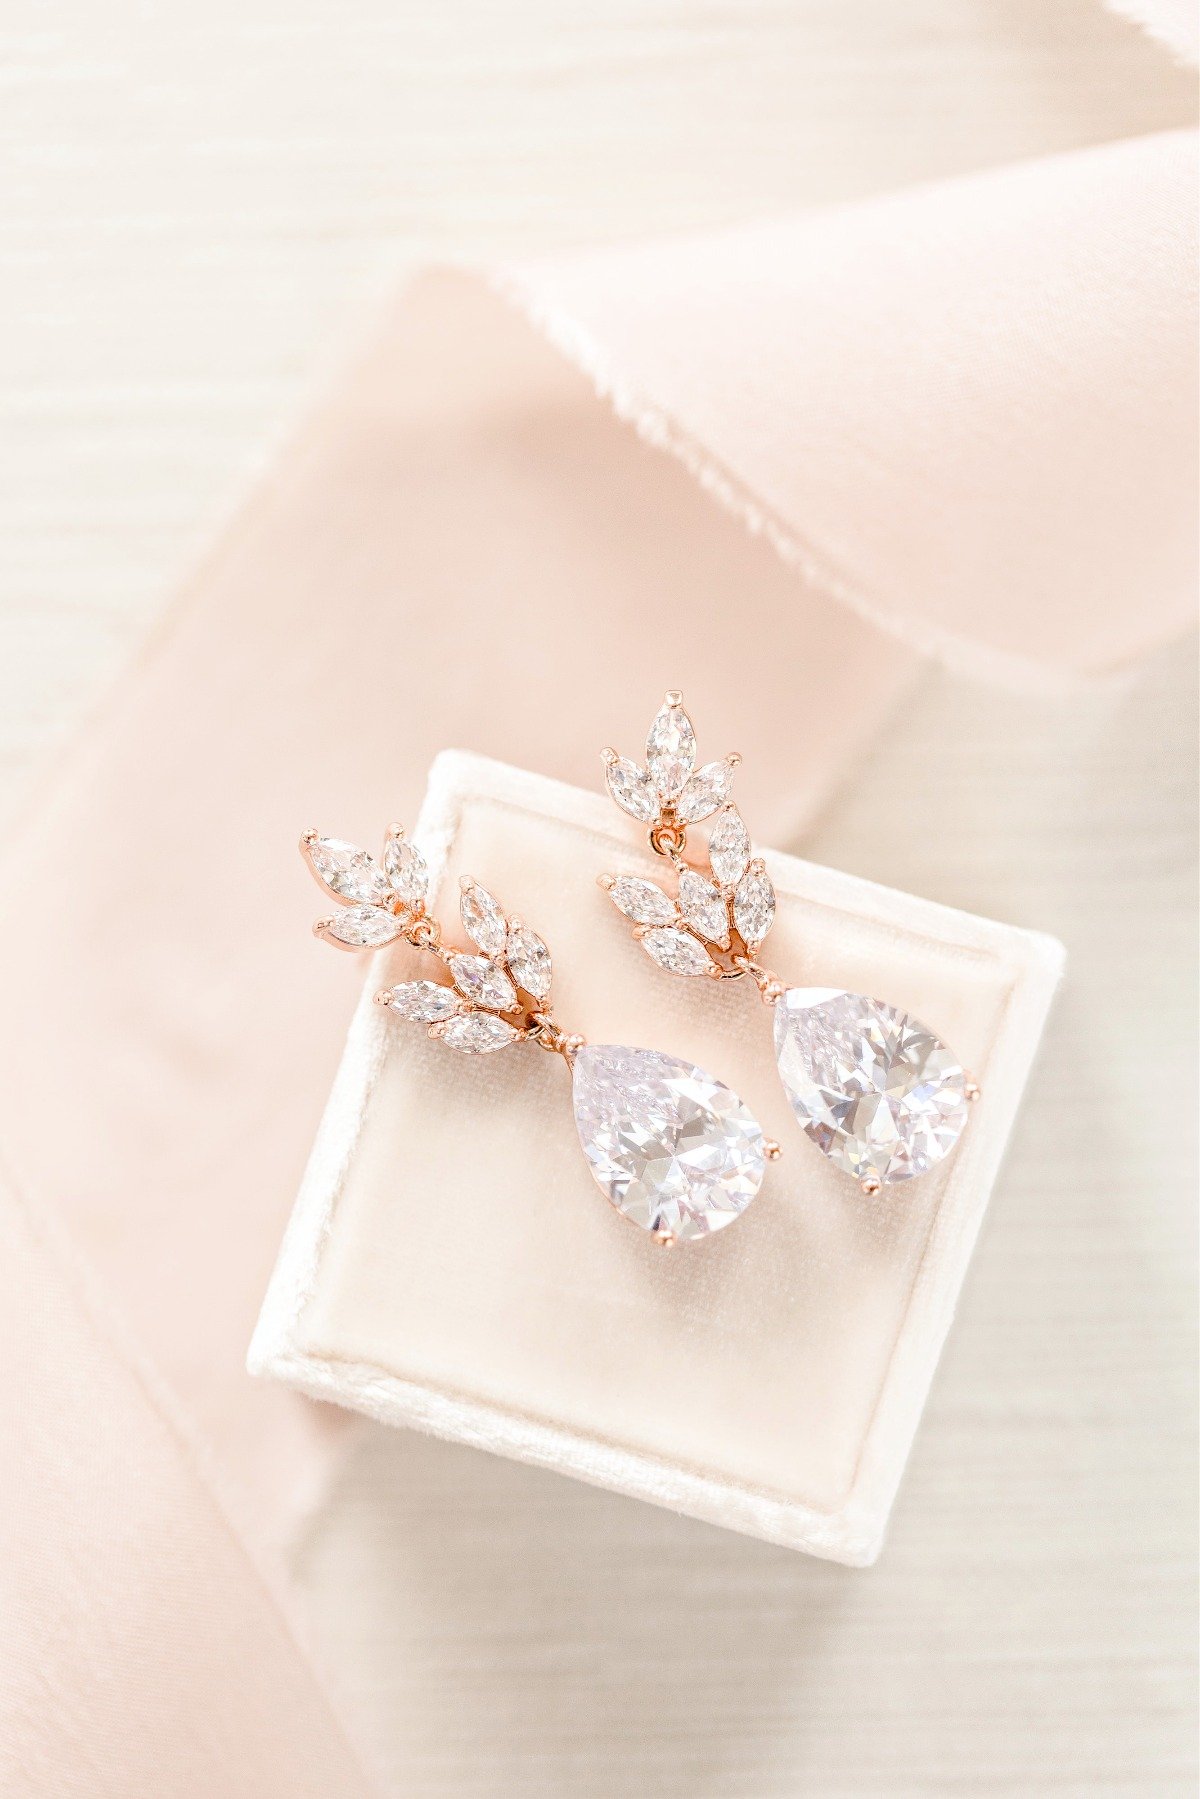 How to Choose Bridesmaid Jewelry for Every Dress Style